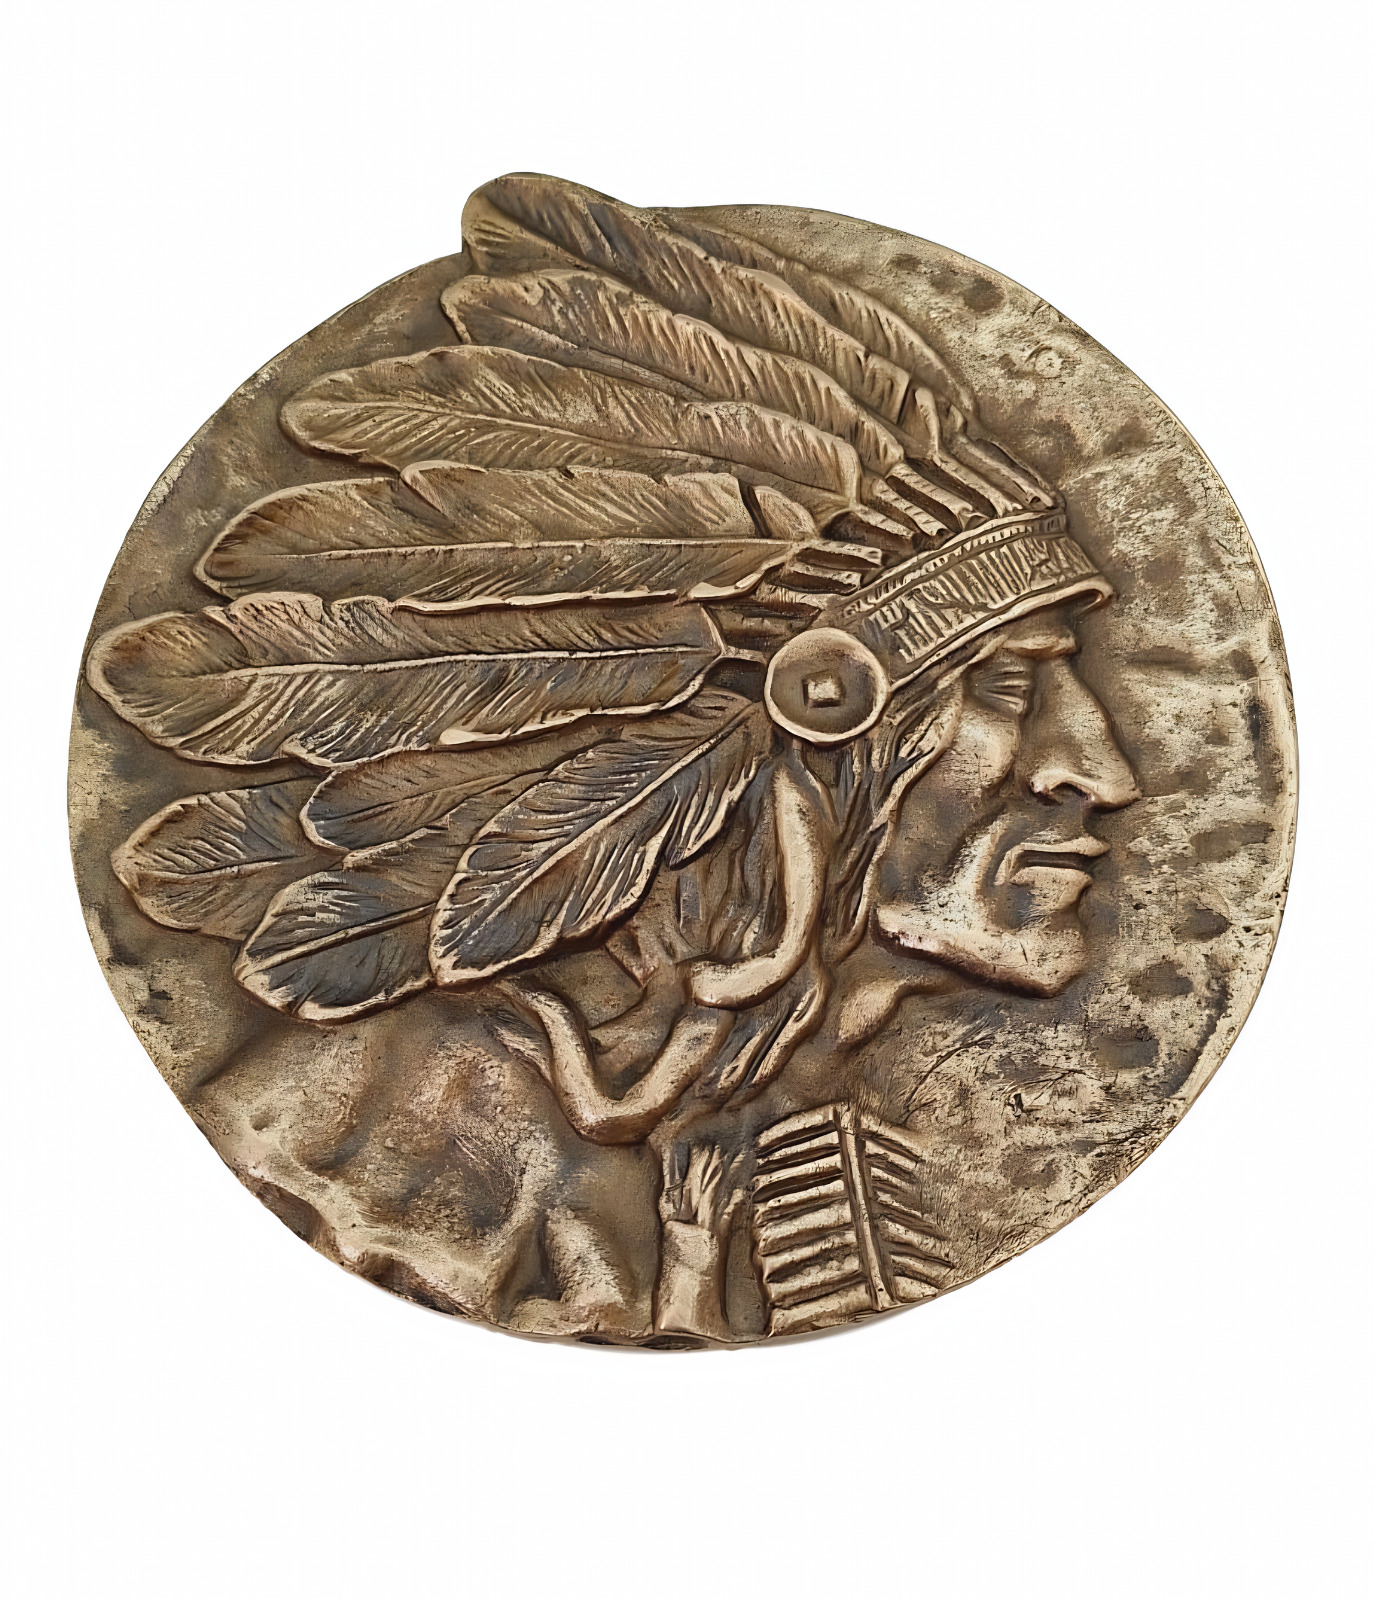 1905 SOLID BRONZE PLAQUE OF A NATIVE AMERICAN INDIAN ANTIQUE